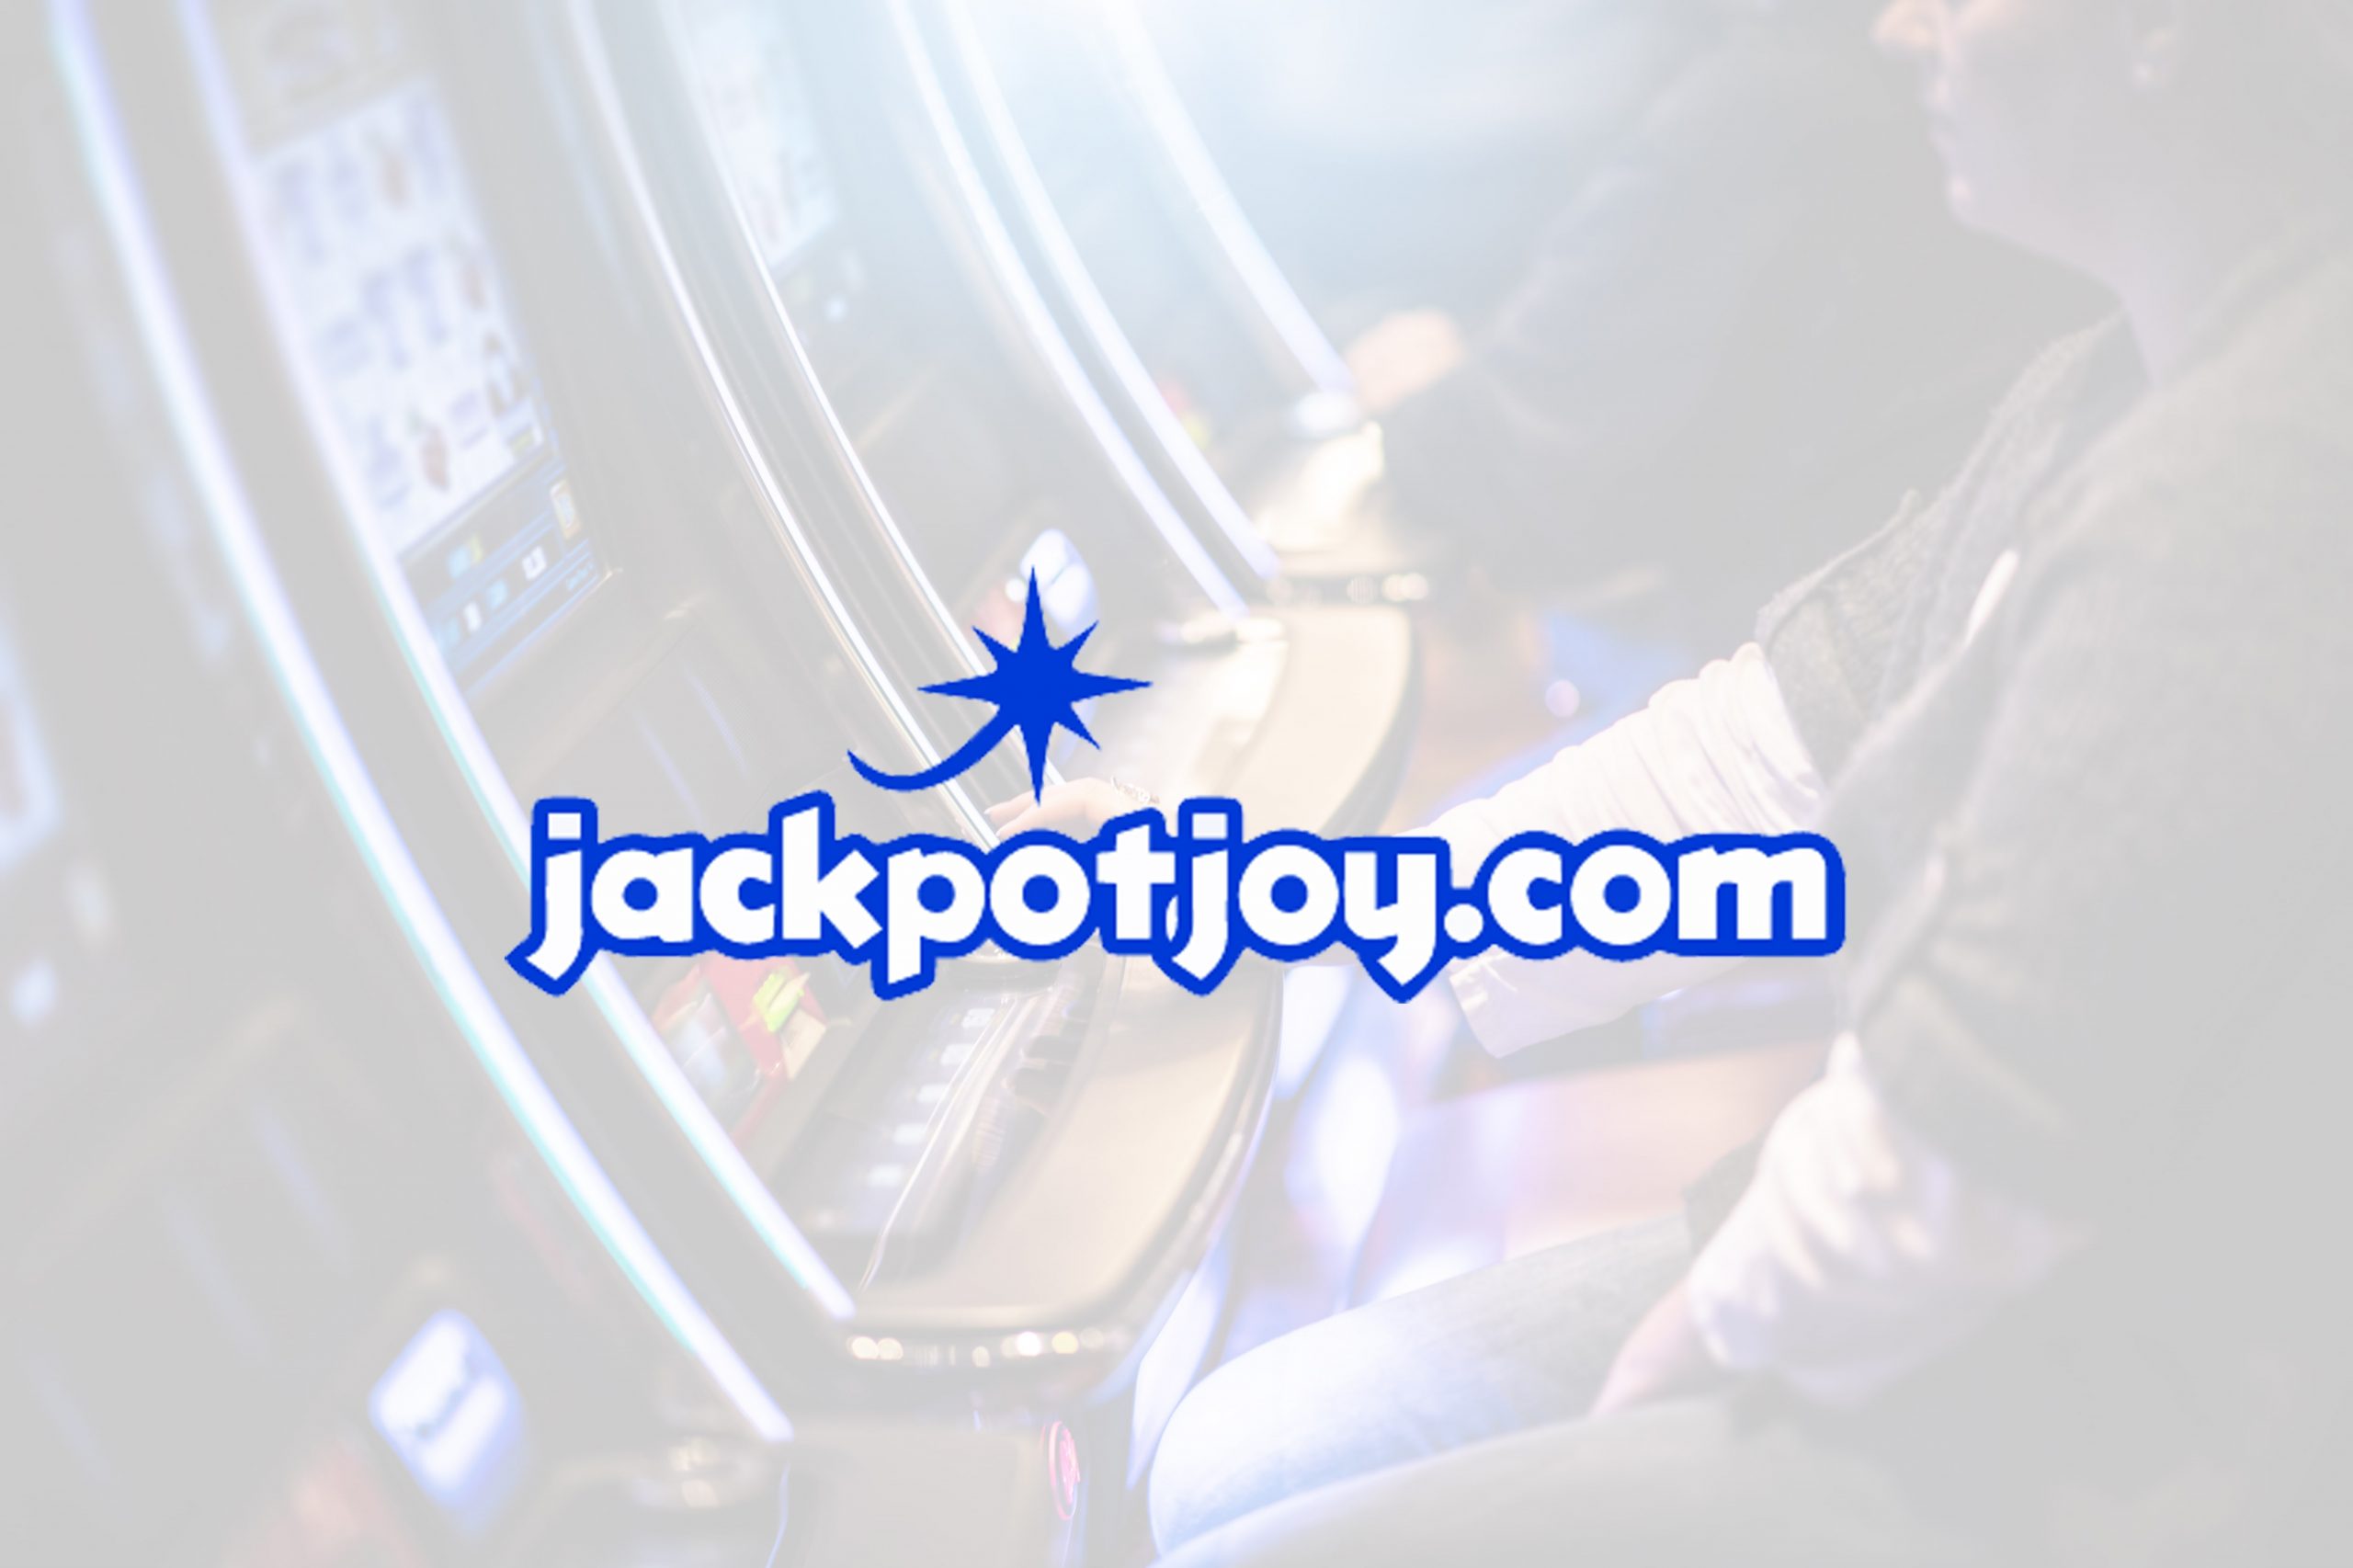 Jackpotjoy VIP Club: Perks, Rewards and Exclusive Offers